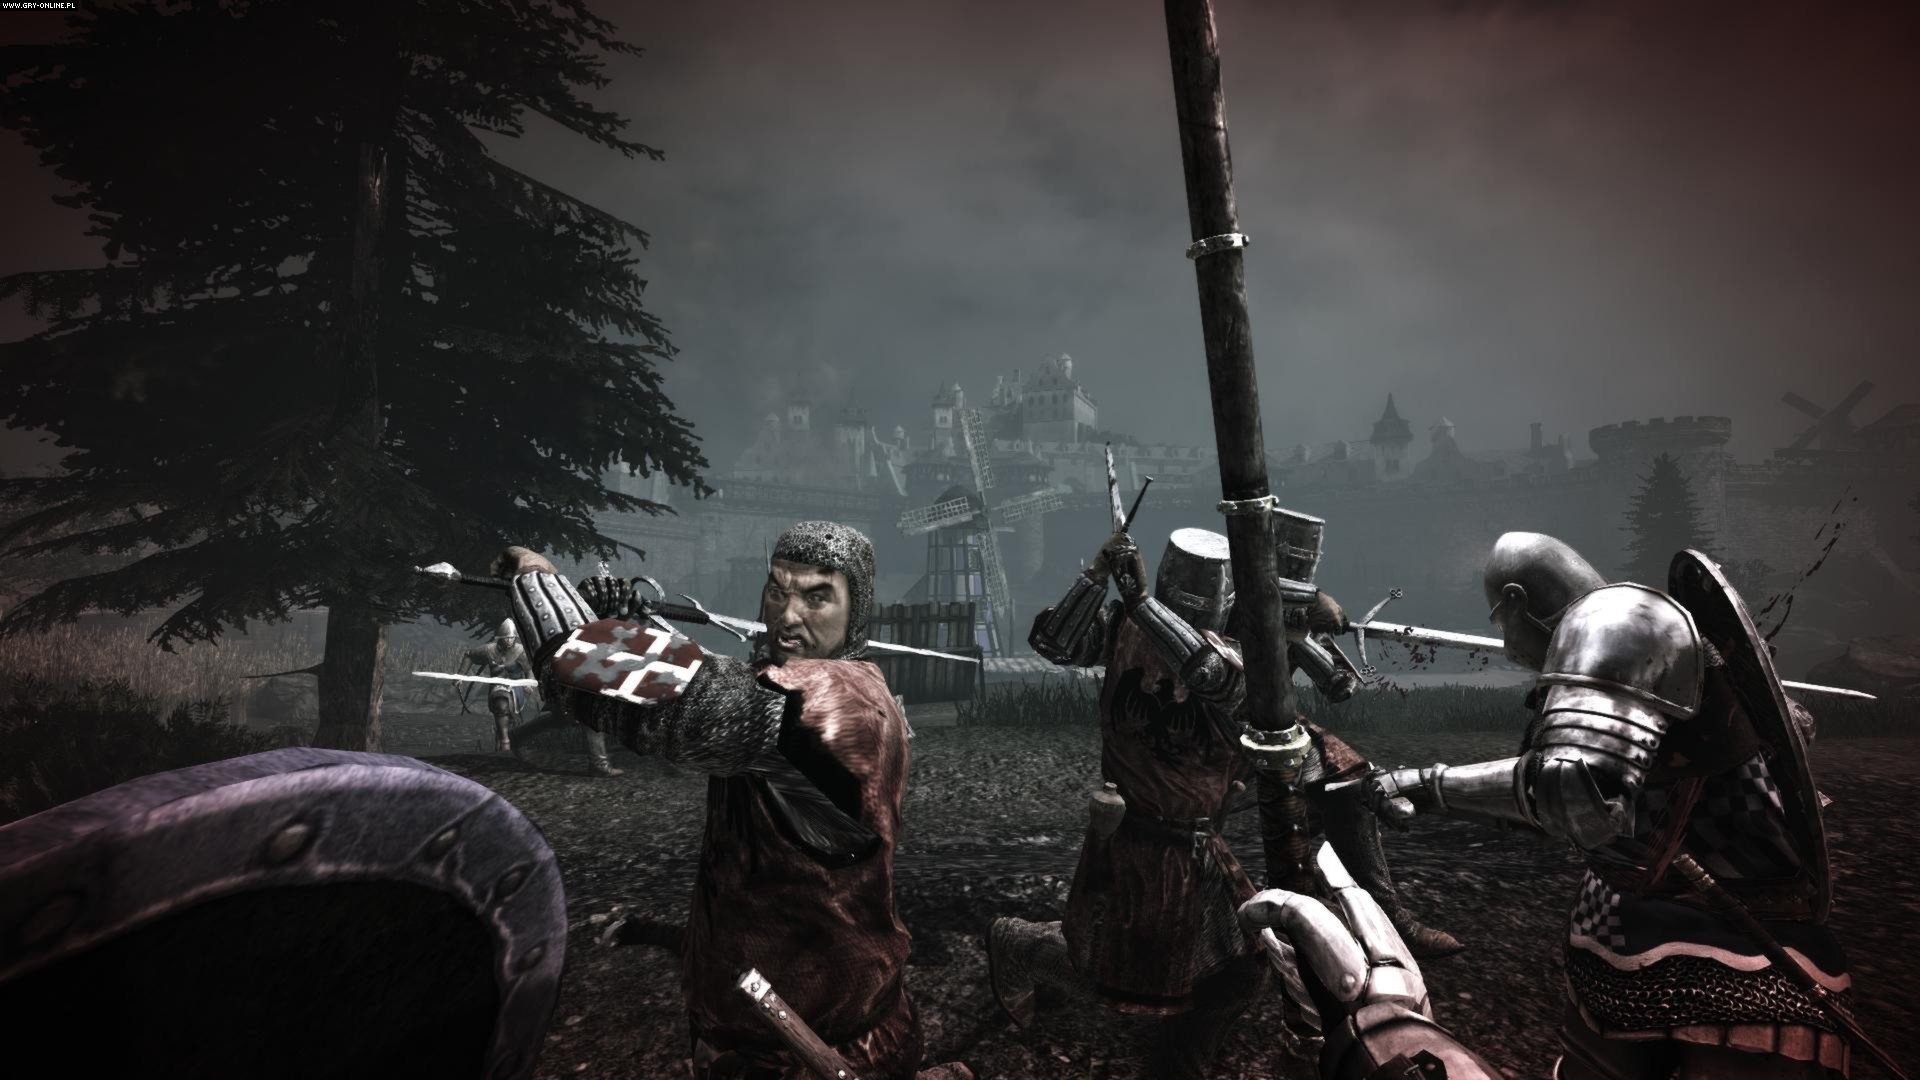 The fighting in Chivalry: Medieval Warfare is very in-your-face